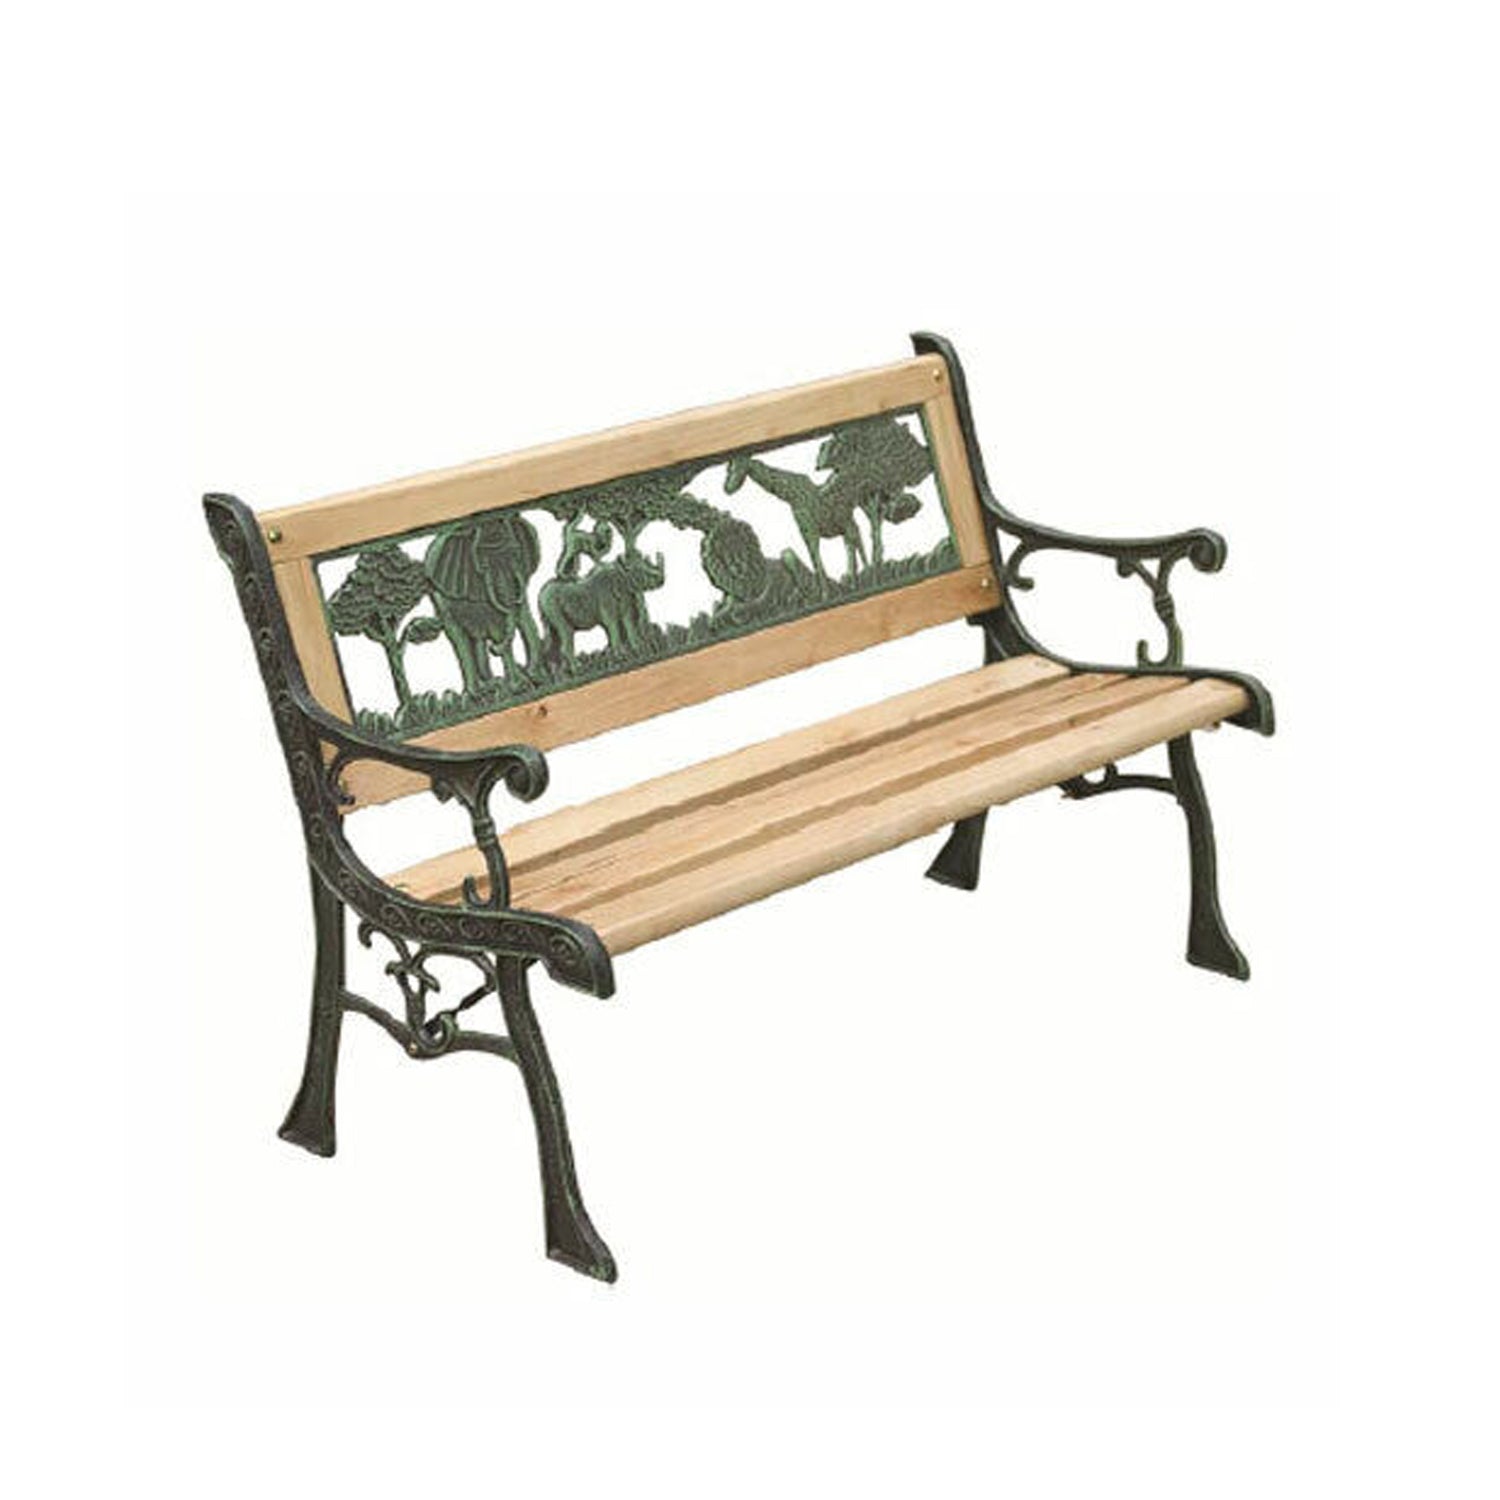 2 Seater Wooden & Cast Iron Kids Bench